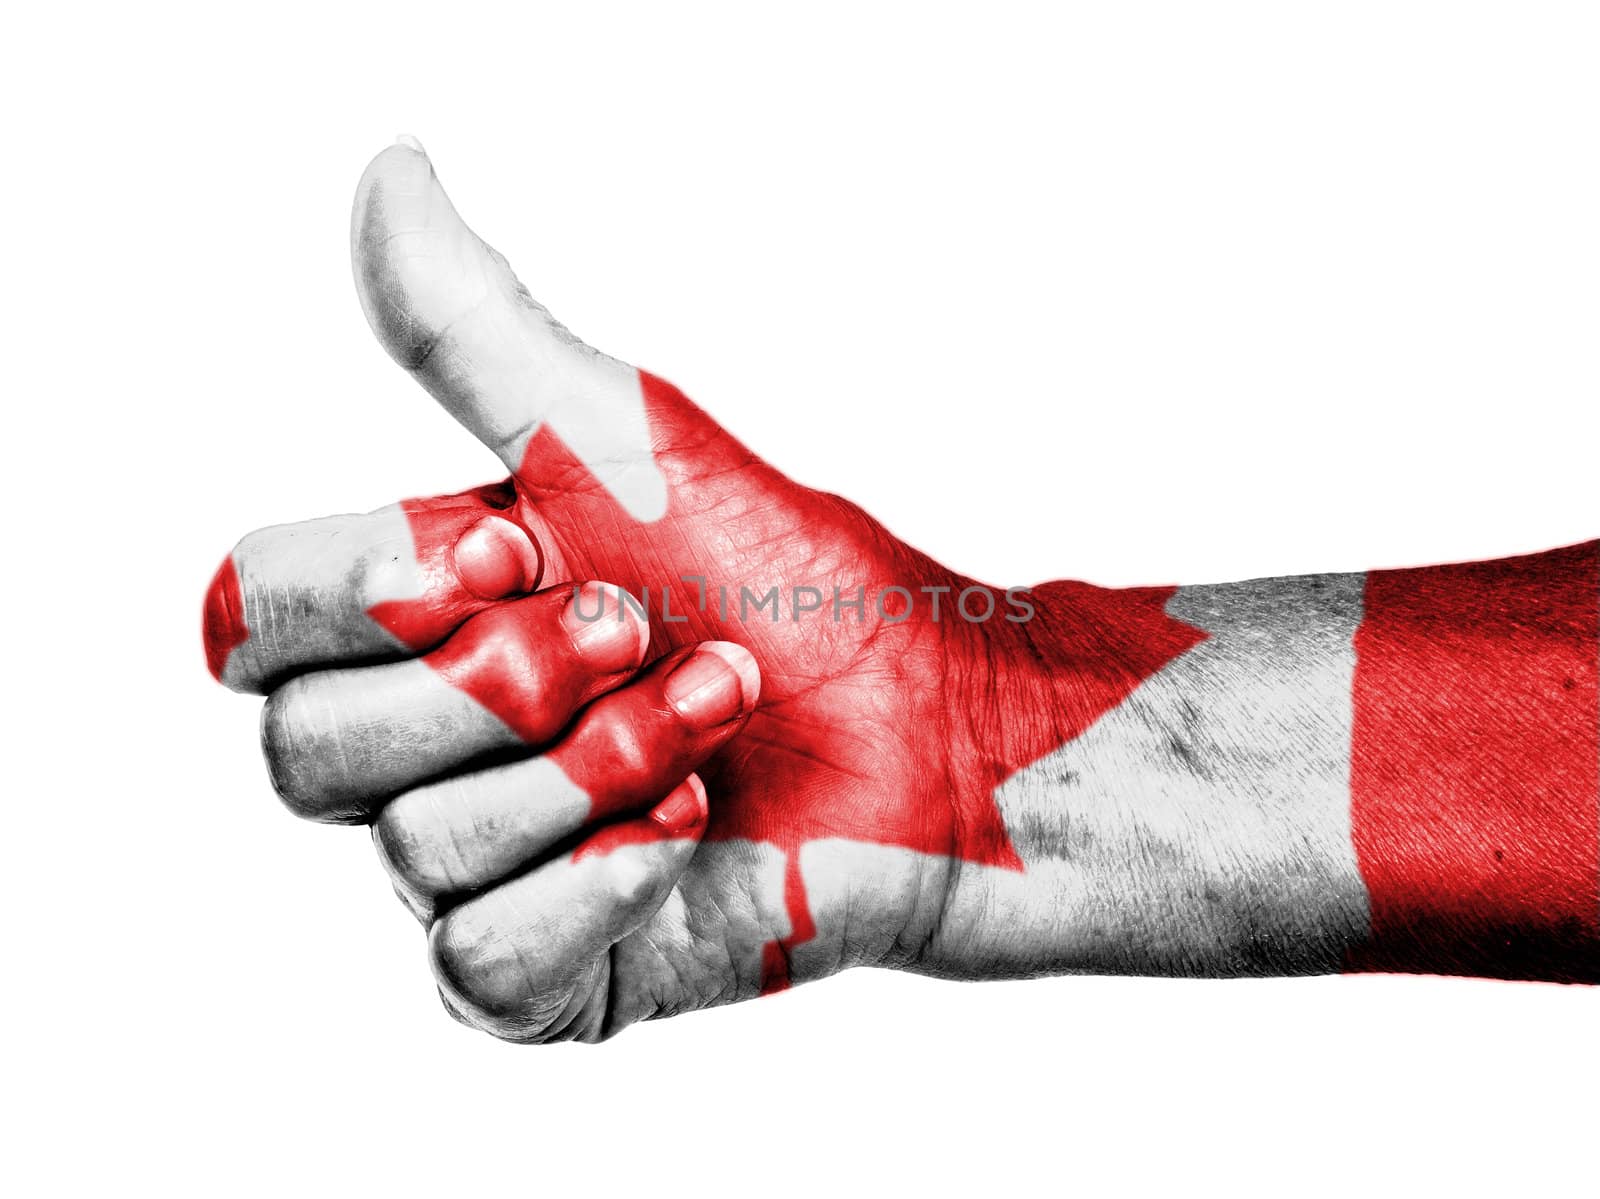 Old woman with arthritis giving the thumbs up sign, wrapped in flag pattern, Canada